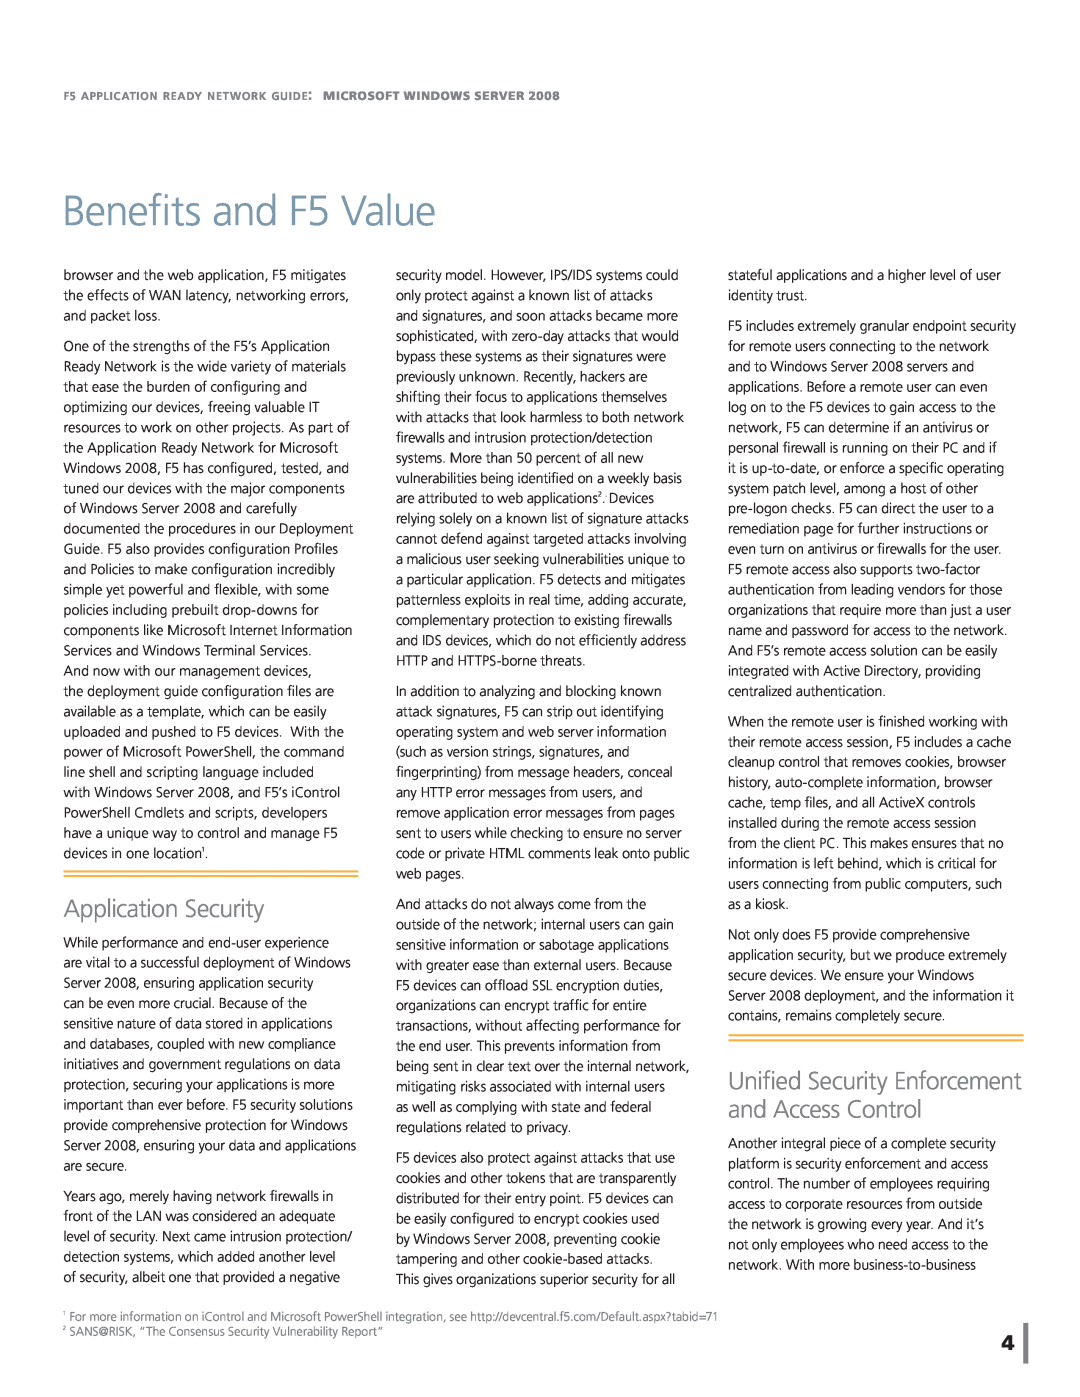 Microsoft P7305128, R1802907 Application Security, Beneﬁts and F5 Value, Uniﬁed Security Enforcement and Access Control 